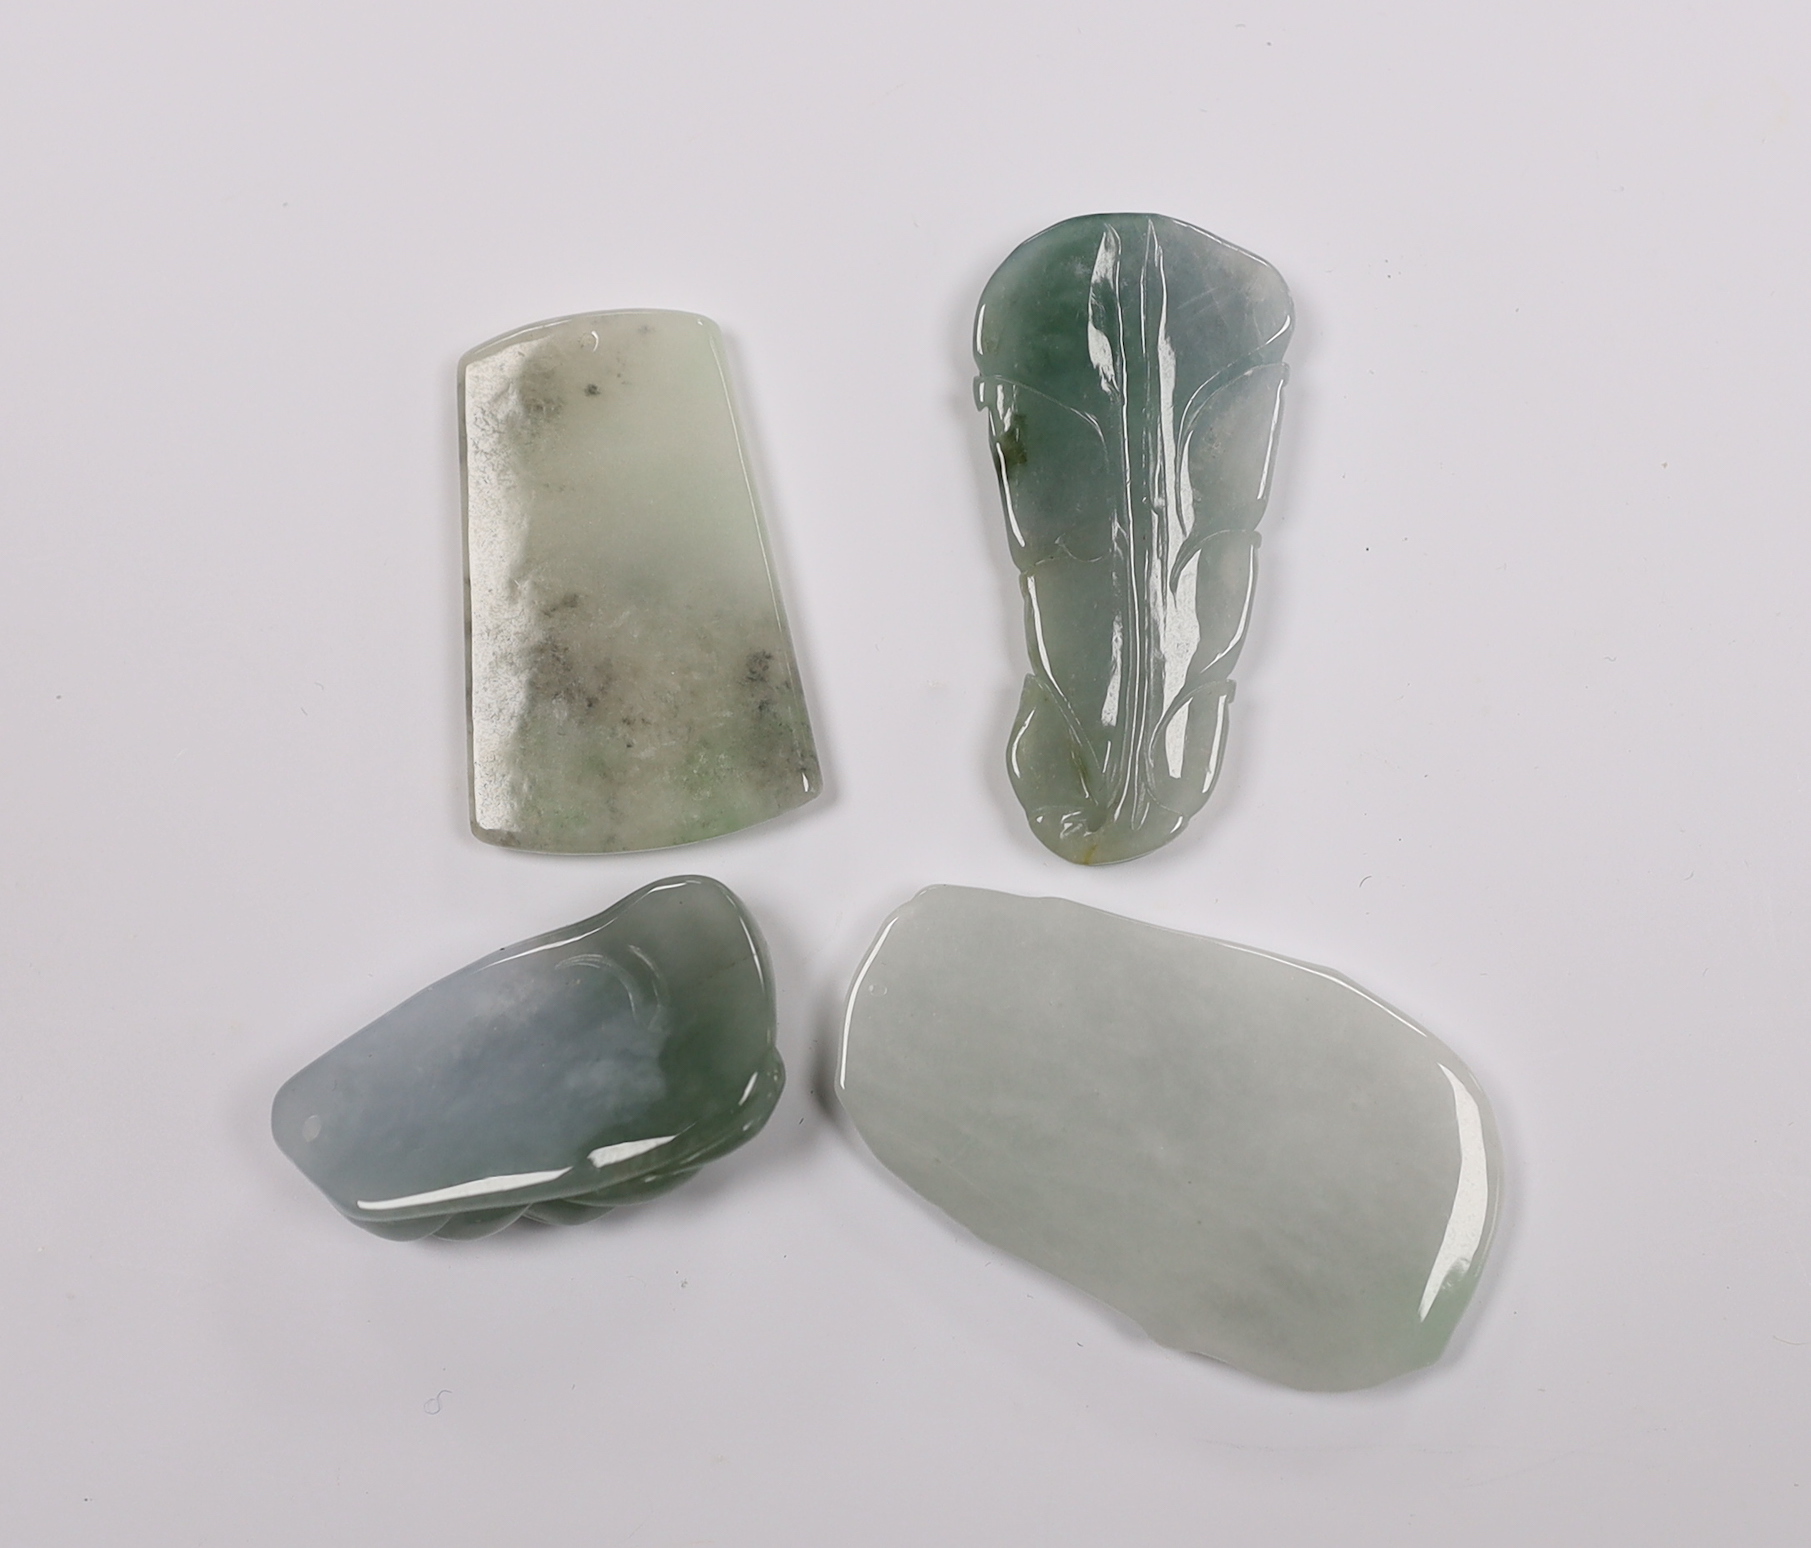 Four Chinese carved jadeite pendants